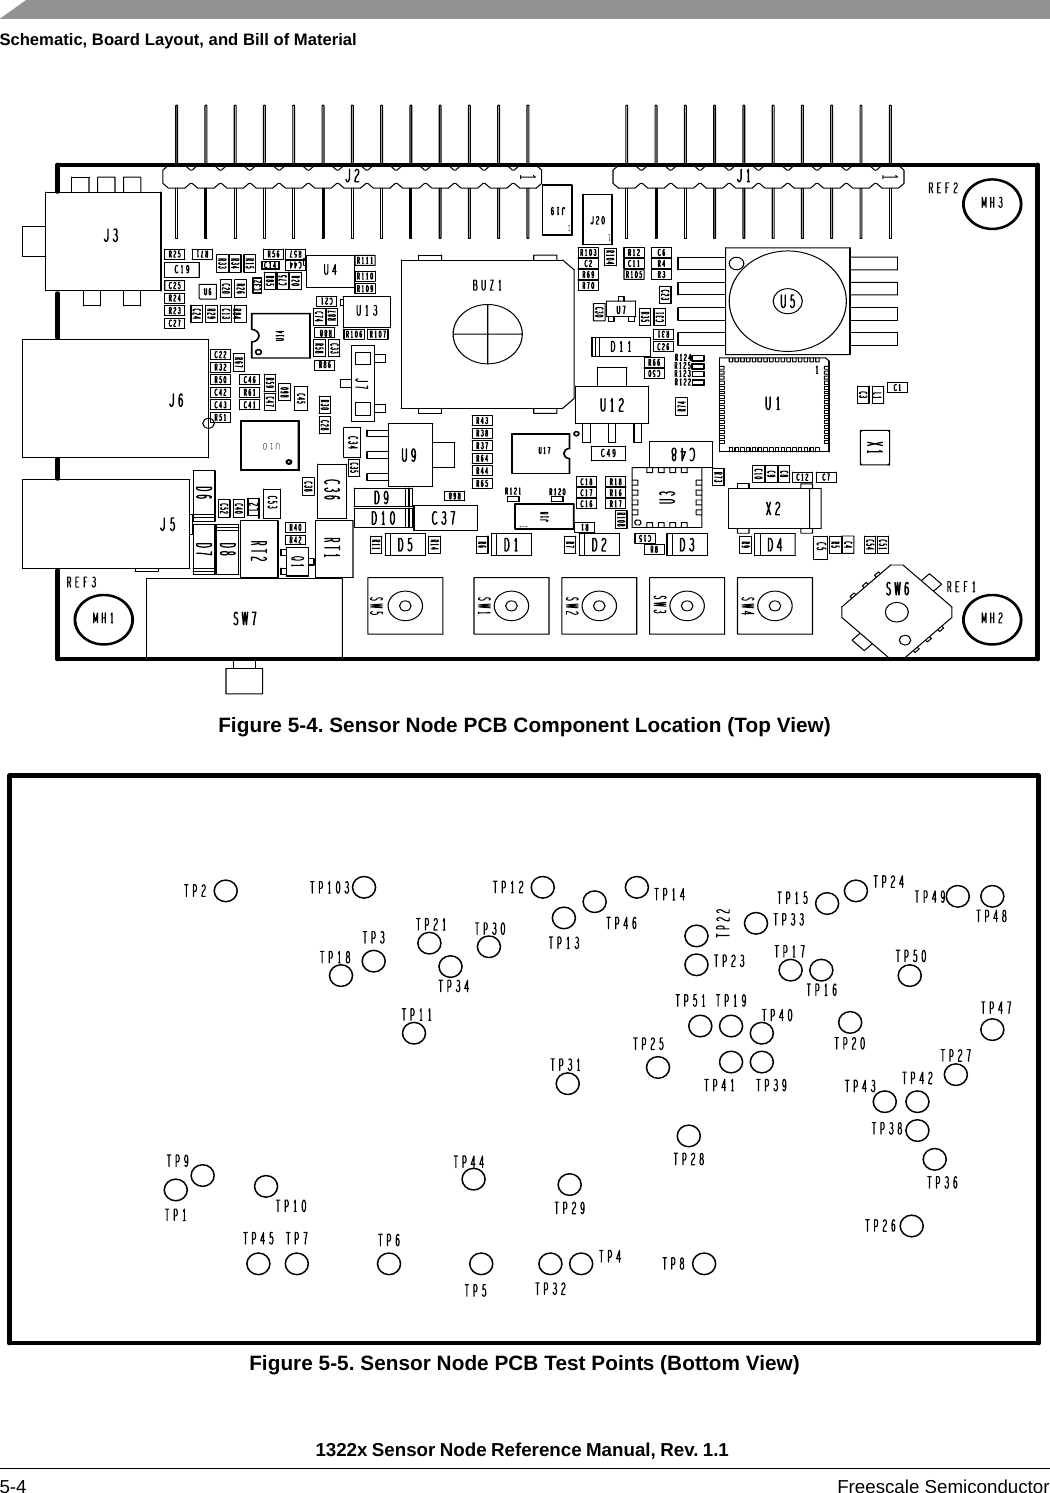 Schematic, Board Layout, and Bill of Material1322x Sensor Node Reference Manual, Rev. 1.1 5-4 Freescale SemiconductorFigure 5-4. Sensor Node PCB Component Location (Top View)Figure 5-5. Sensor Node PCB Test Points (Bottom View)